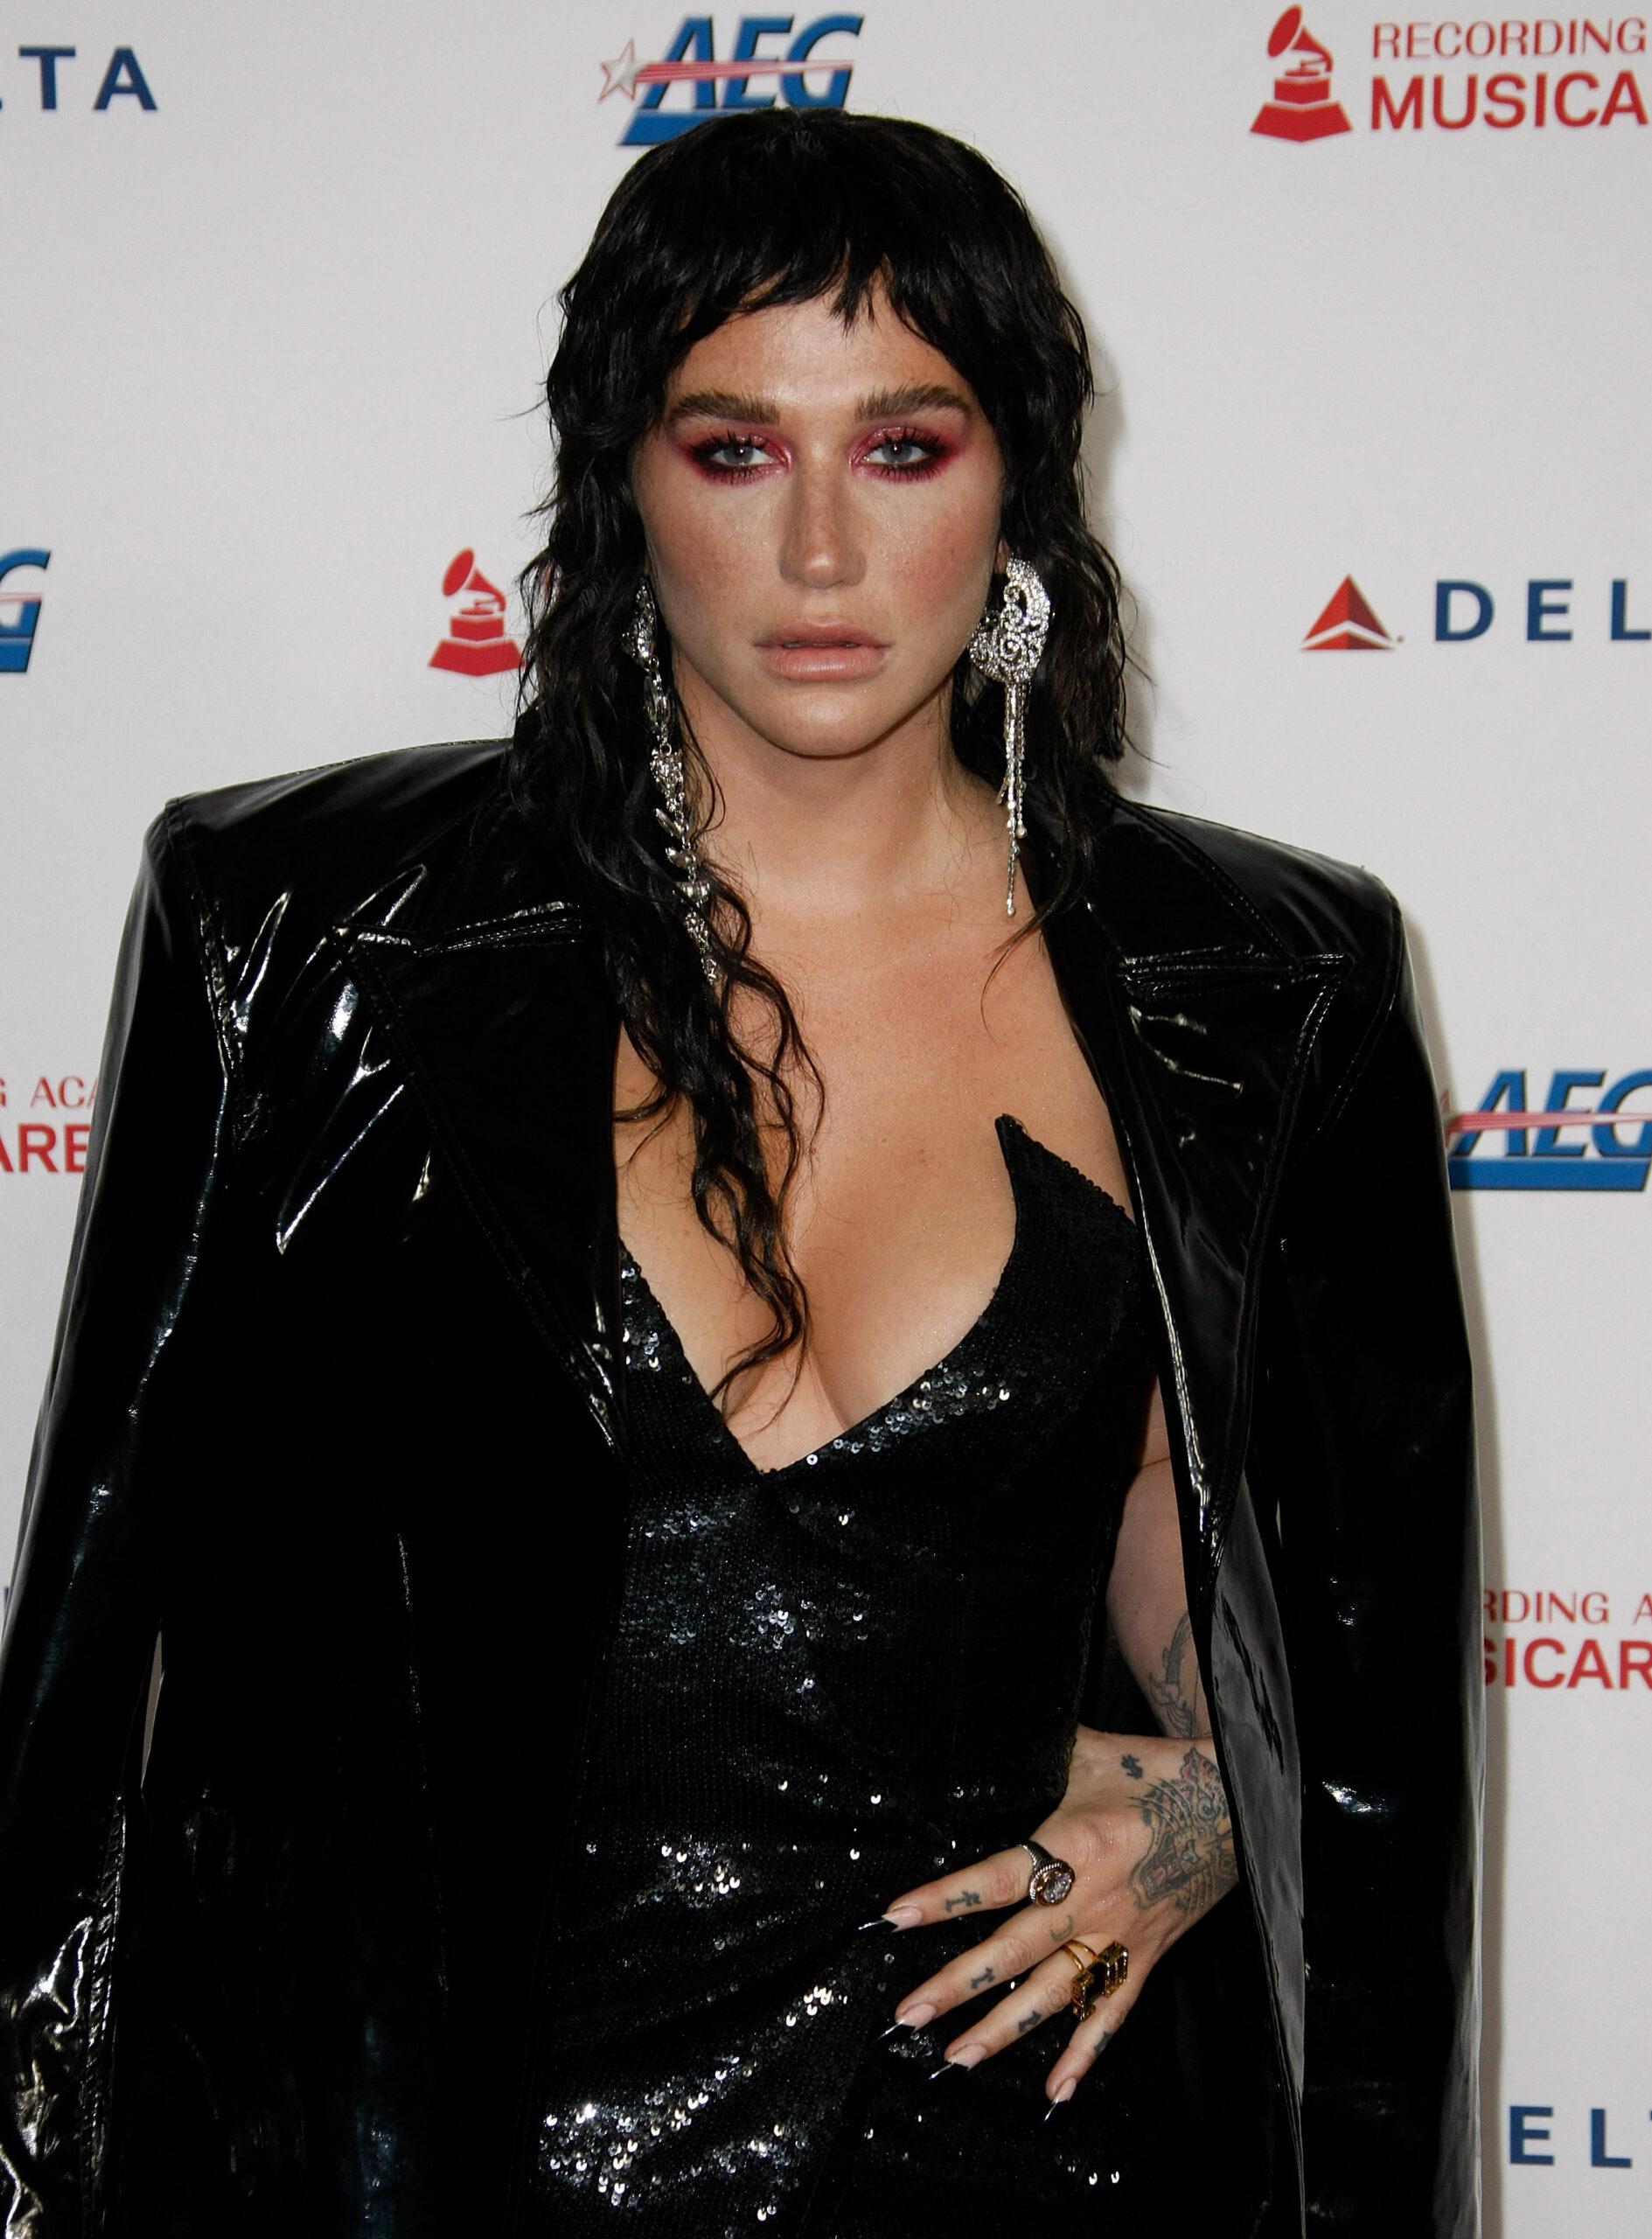 Kesha attends MusiCares Person of the Year Gala